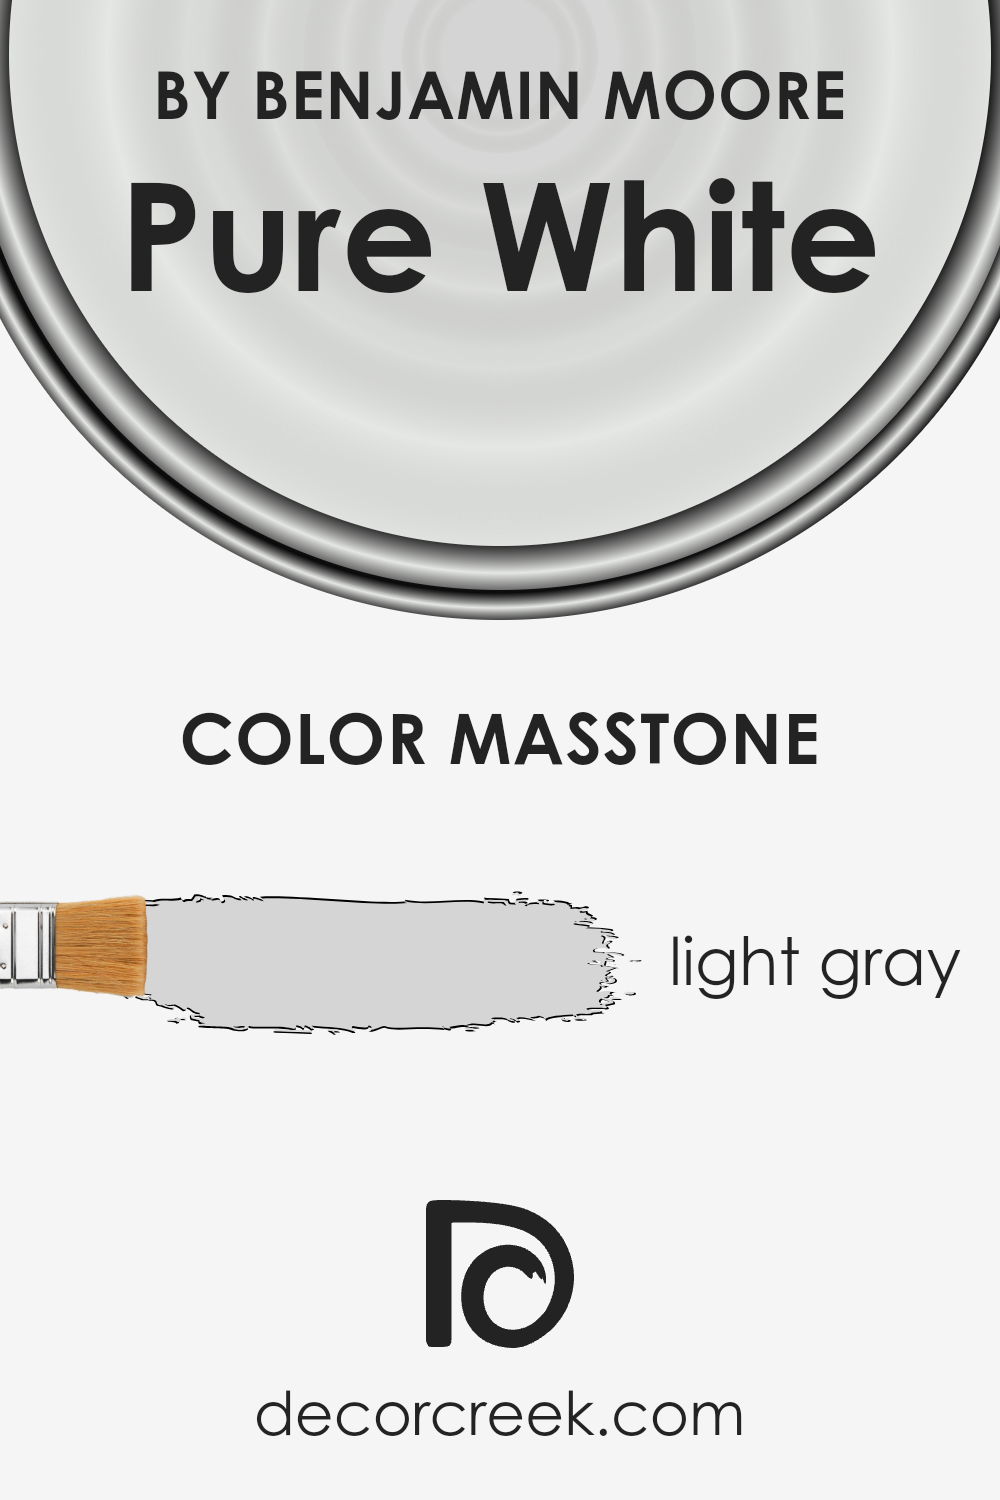 what_is_the_masstone_of_pure_white_oc_64